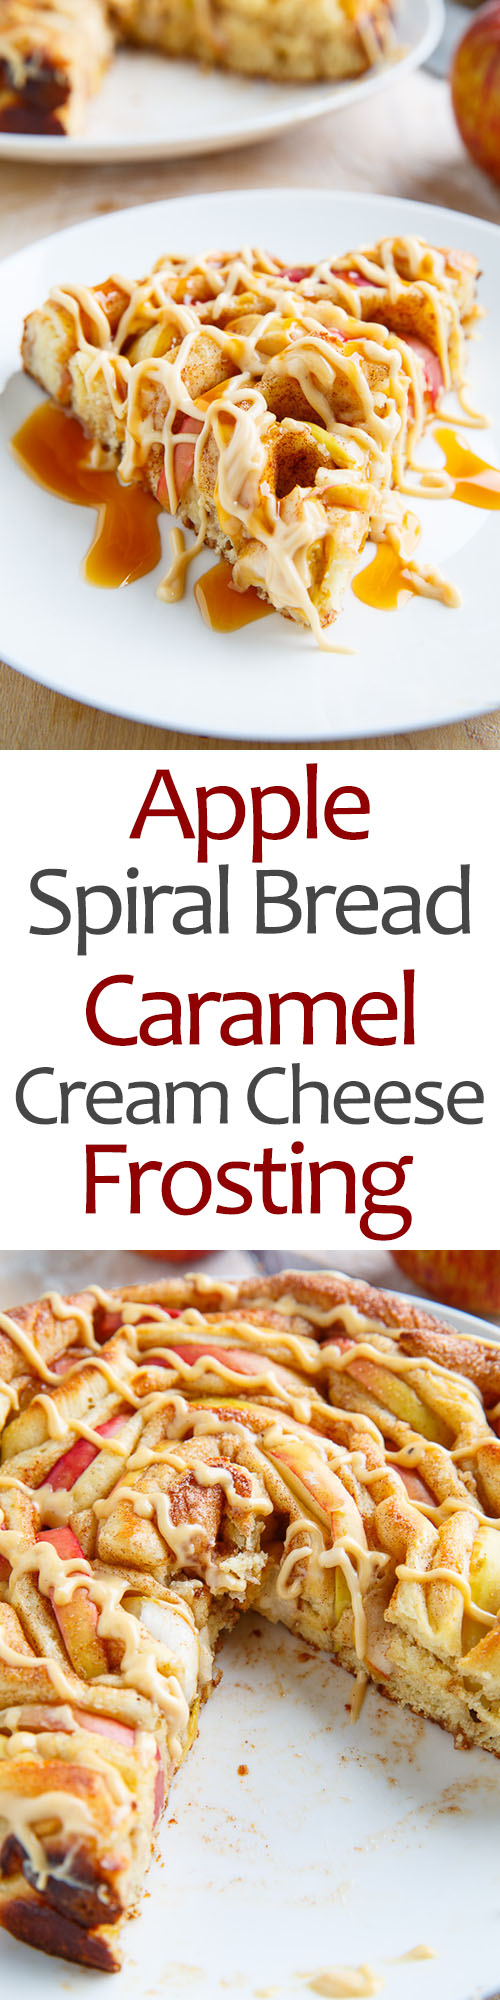 Apple Cinnamon Spiral Bread with Caramel Cream Cheese Frosting